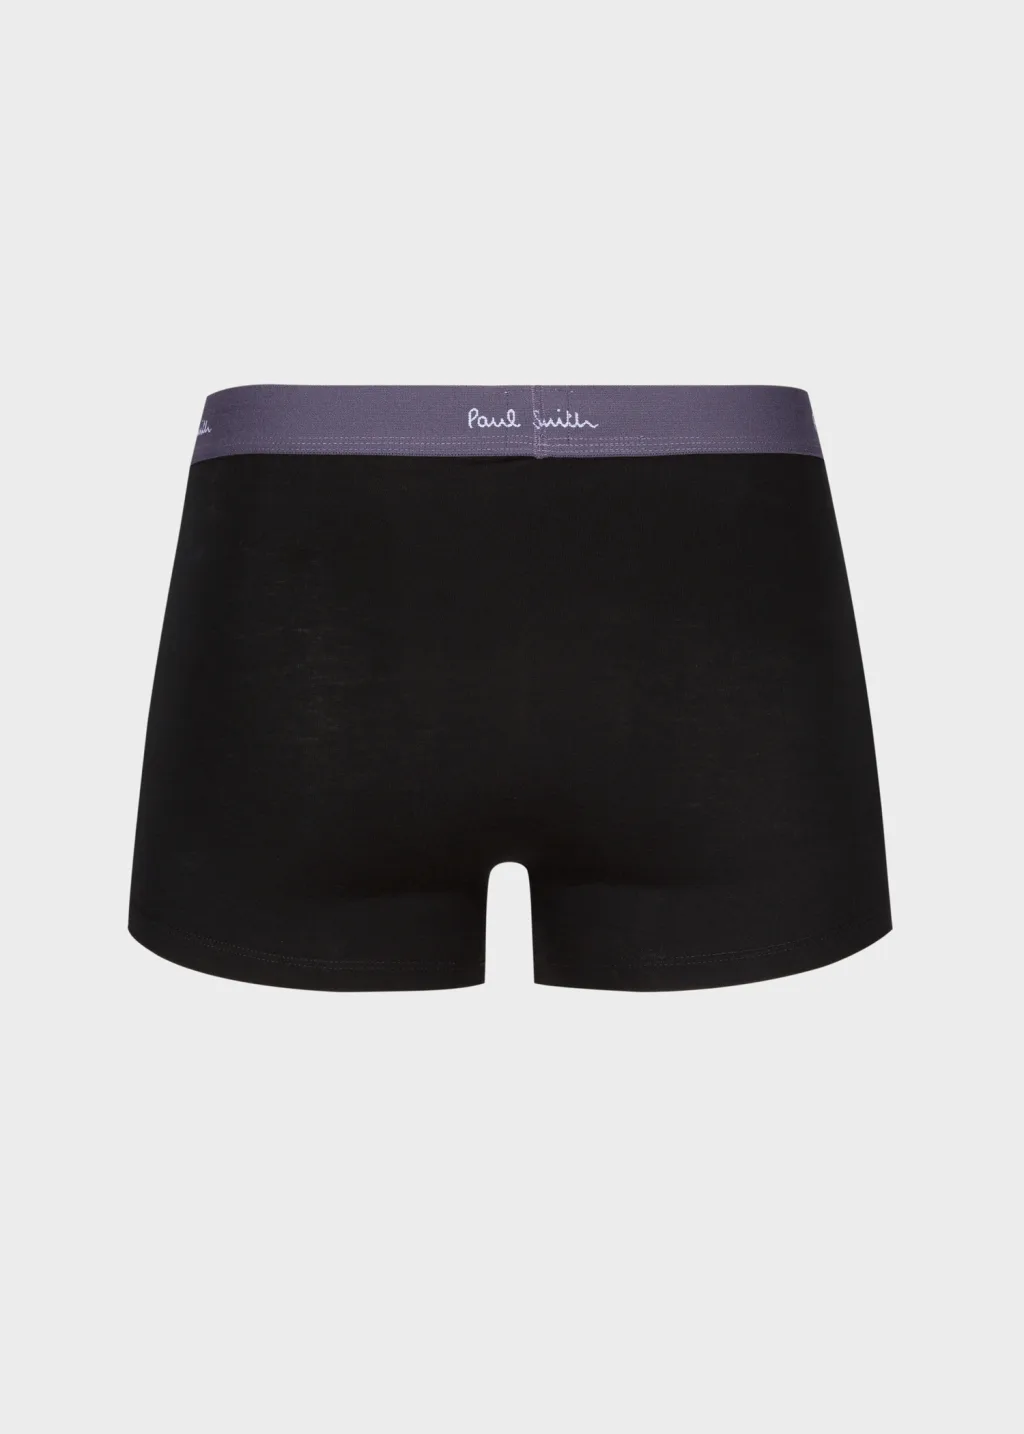 PAUL SMITH Three-Pack Stretch Organic Cotton Boxer Briefs for Men